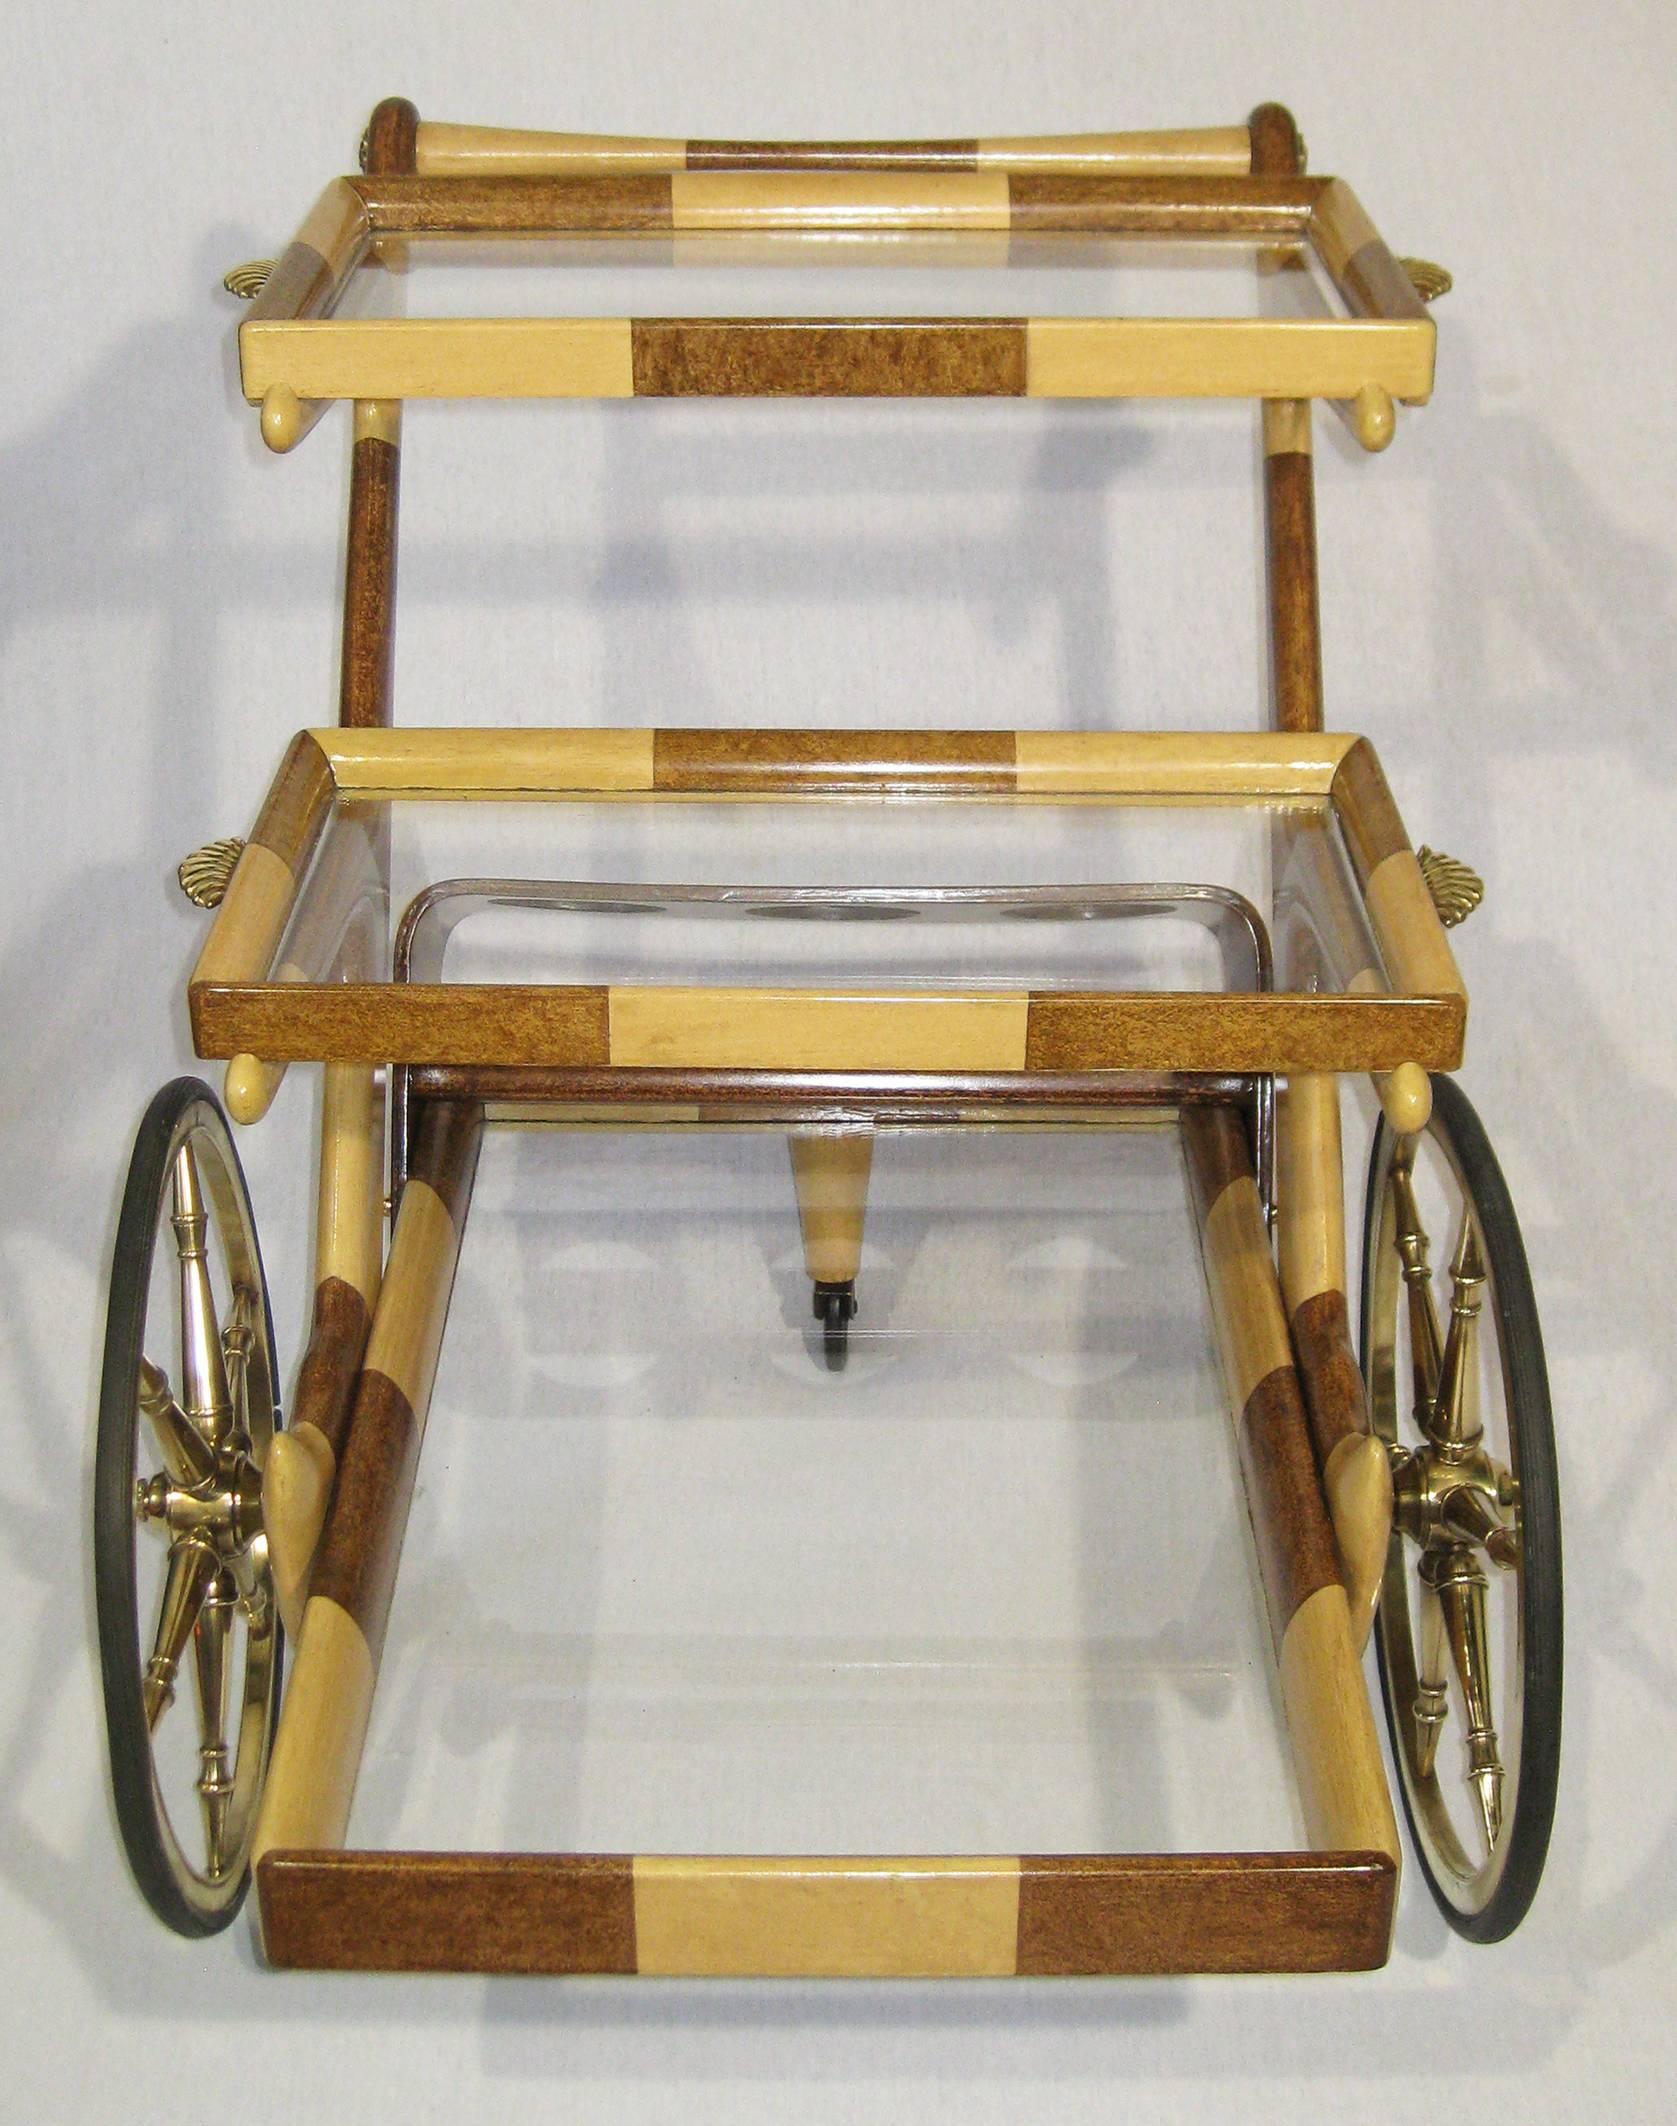 Painted Service Trolley Cart Designed by Aldo Tura, Italy, circa 1950